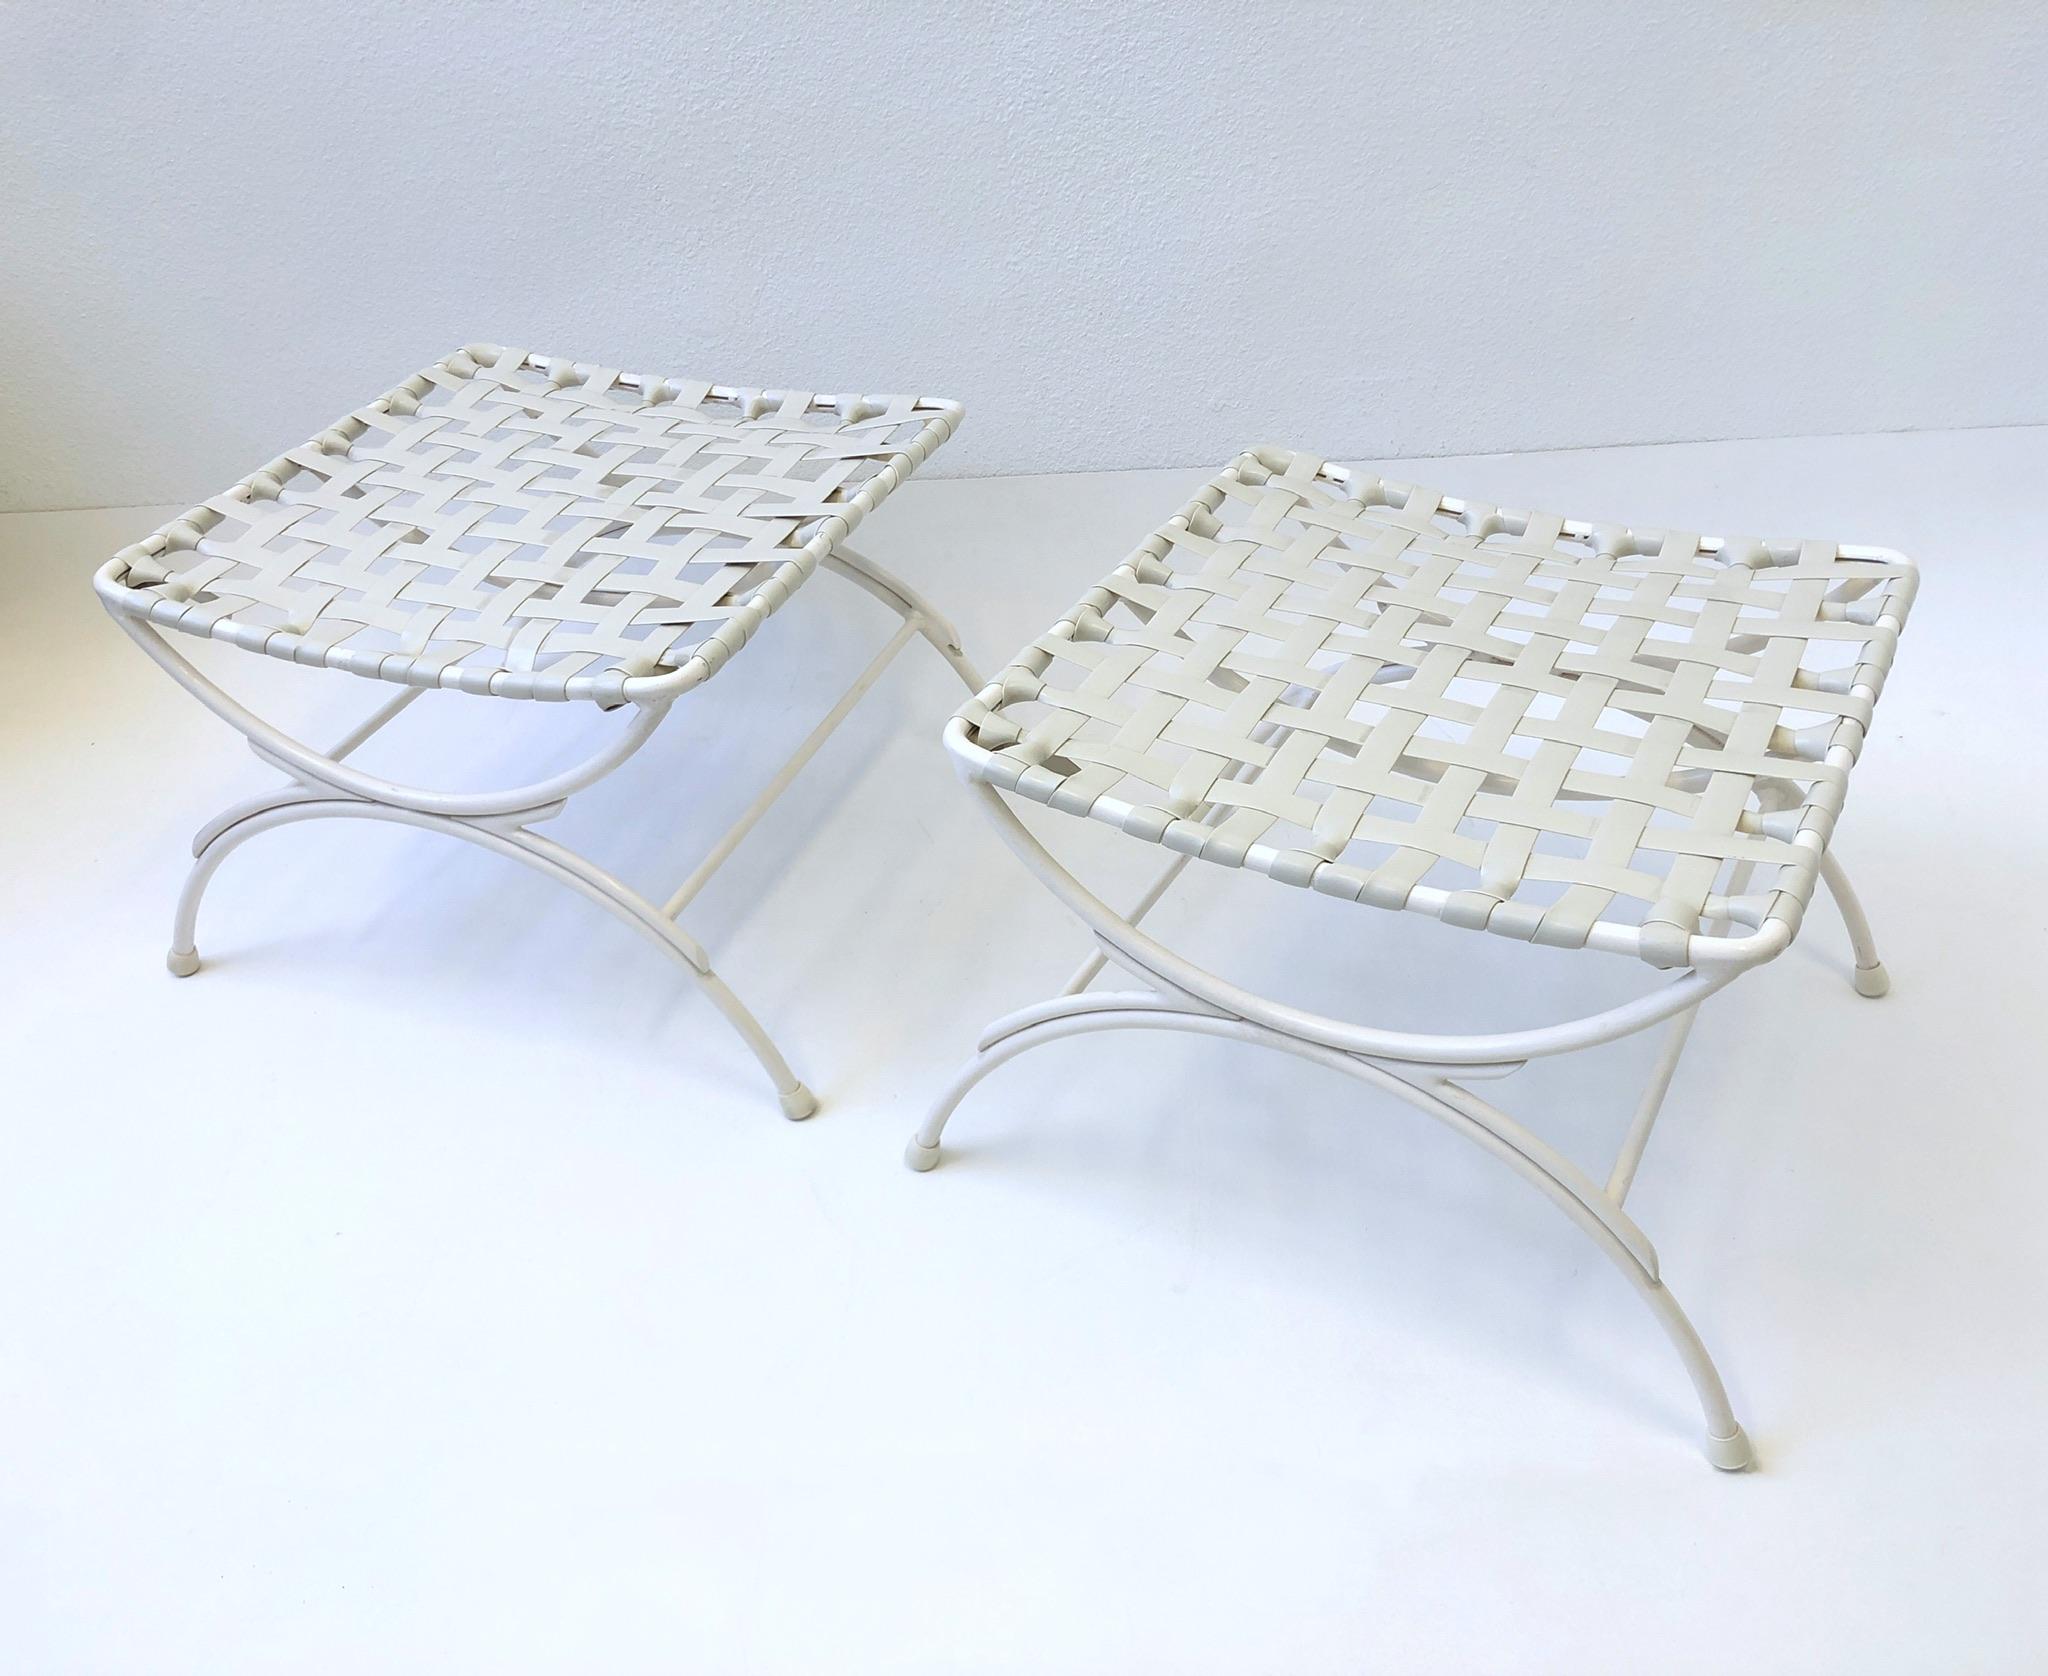 Pair of 1960’s off white lacquered aluminum and vinyl strapping design by Keller Scroll of Miami. 
Dining table and four chairs available also. 
This are in great condition with minor wear consistent with age. 
Measurements: 21” Wide, 20” Deep